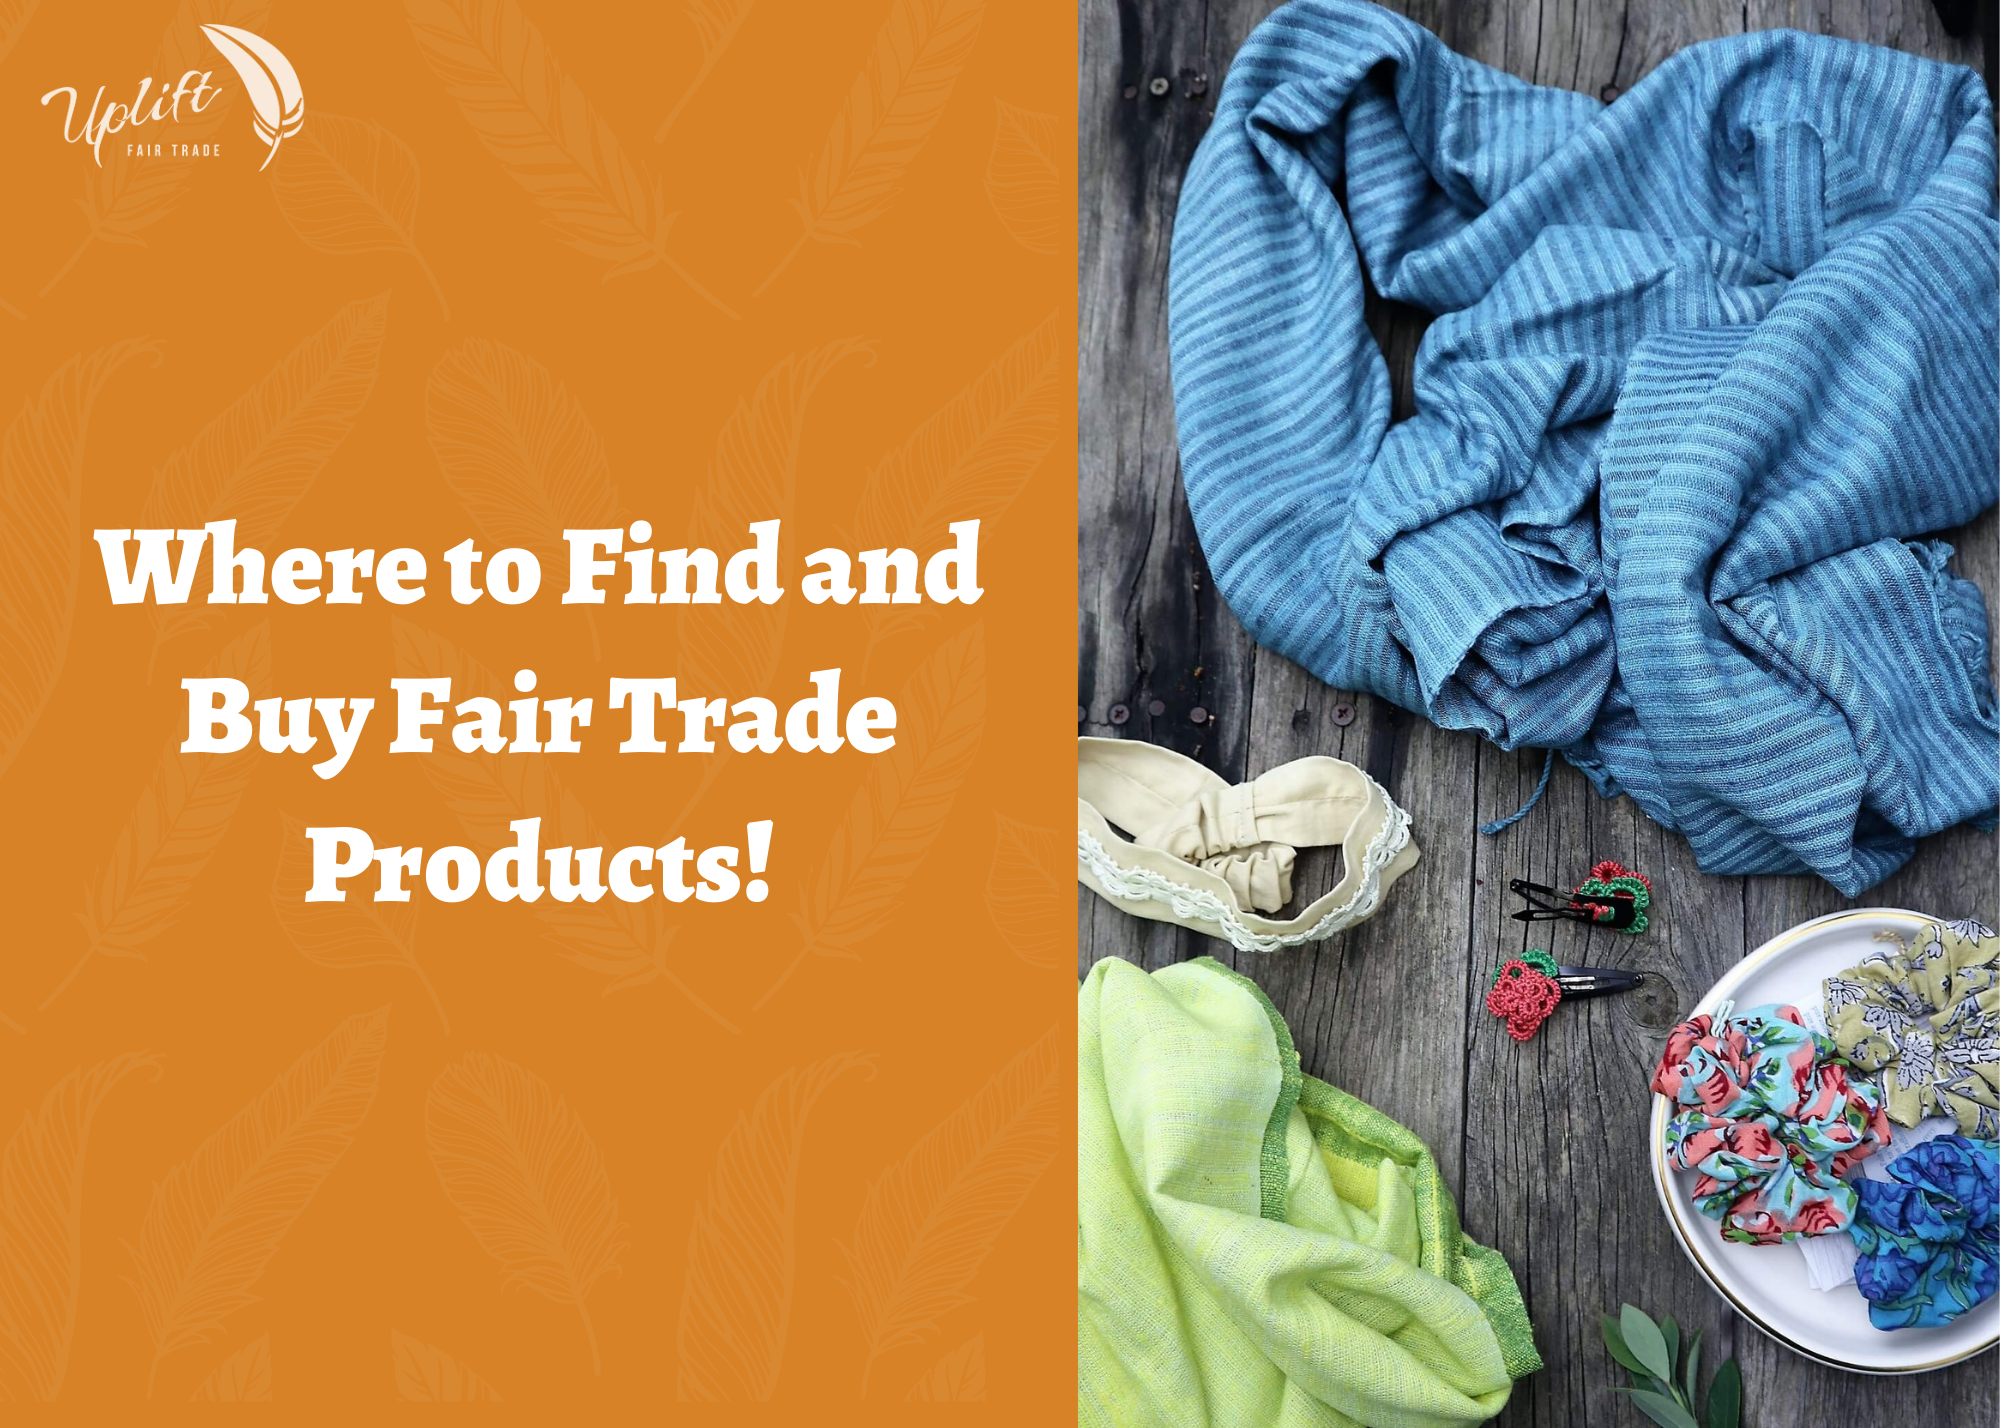 Where to Find and Buy Fair Trade Products